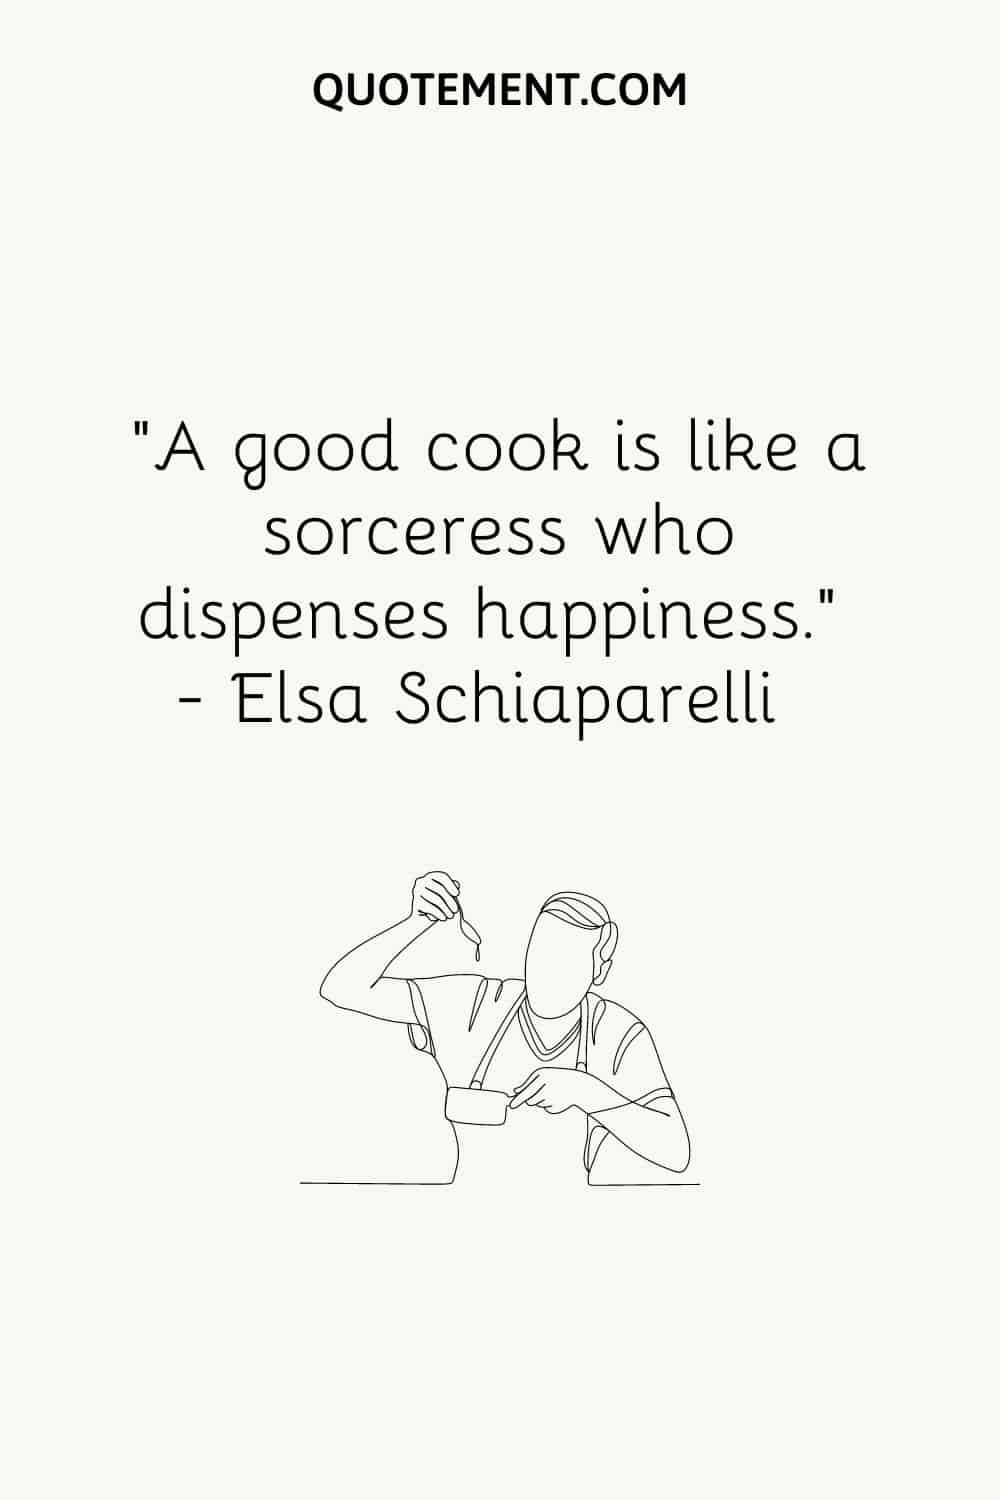 Illustration representing a clever and funny cooking quote.